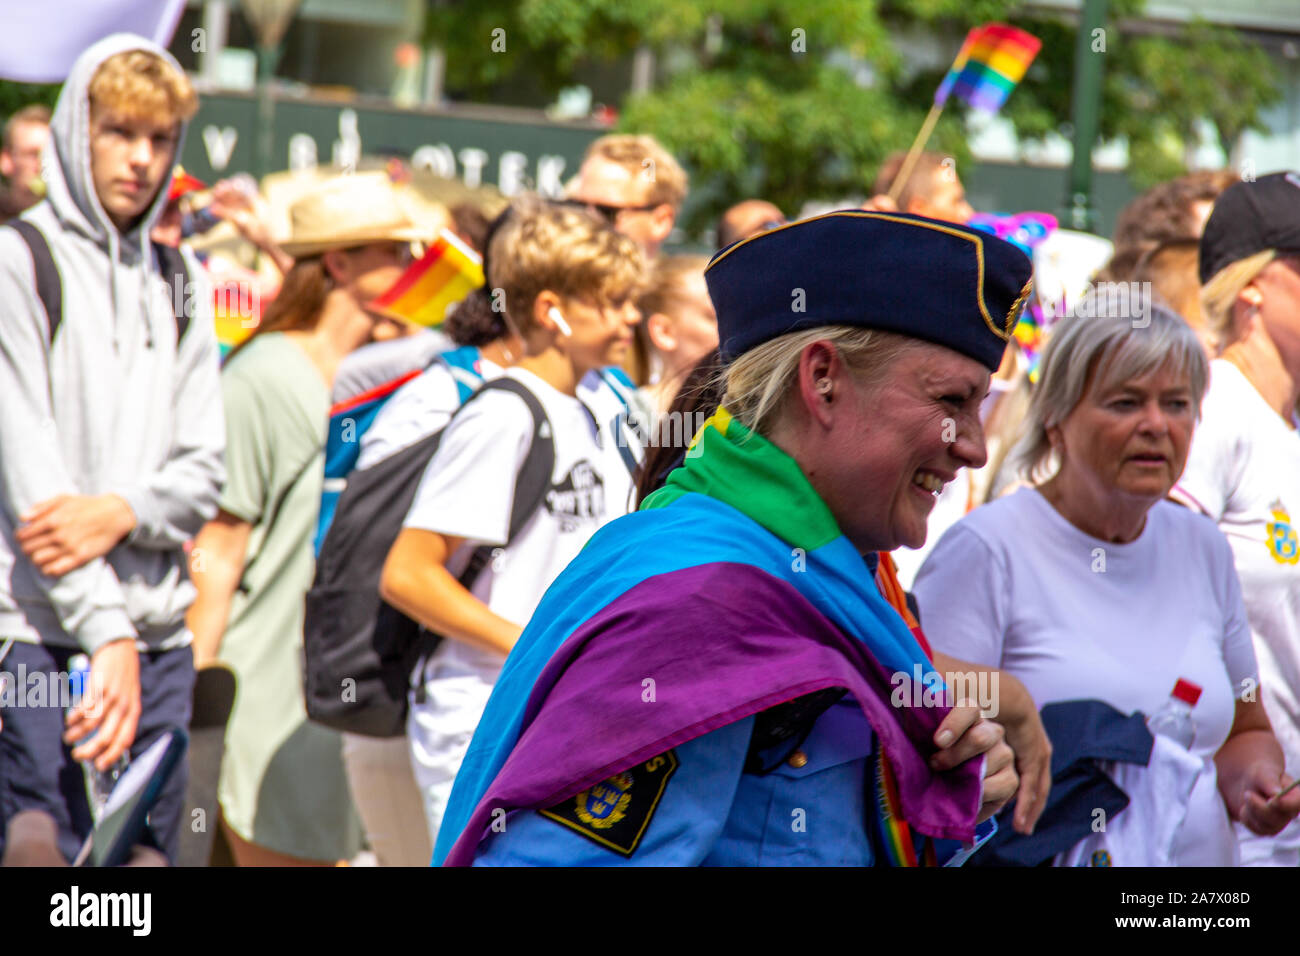 A Swedish police woman with rainbow flag around her shoulders is laughing with happiness as she participates in the annual gay pride parade in Malmö Stock Photo